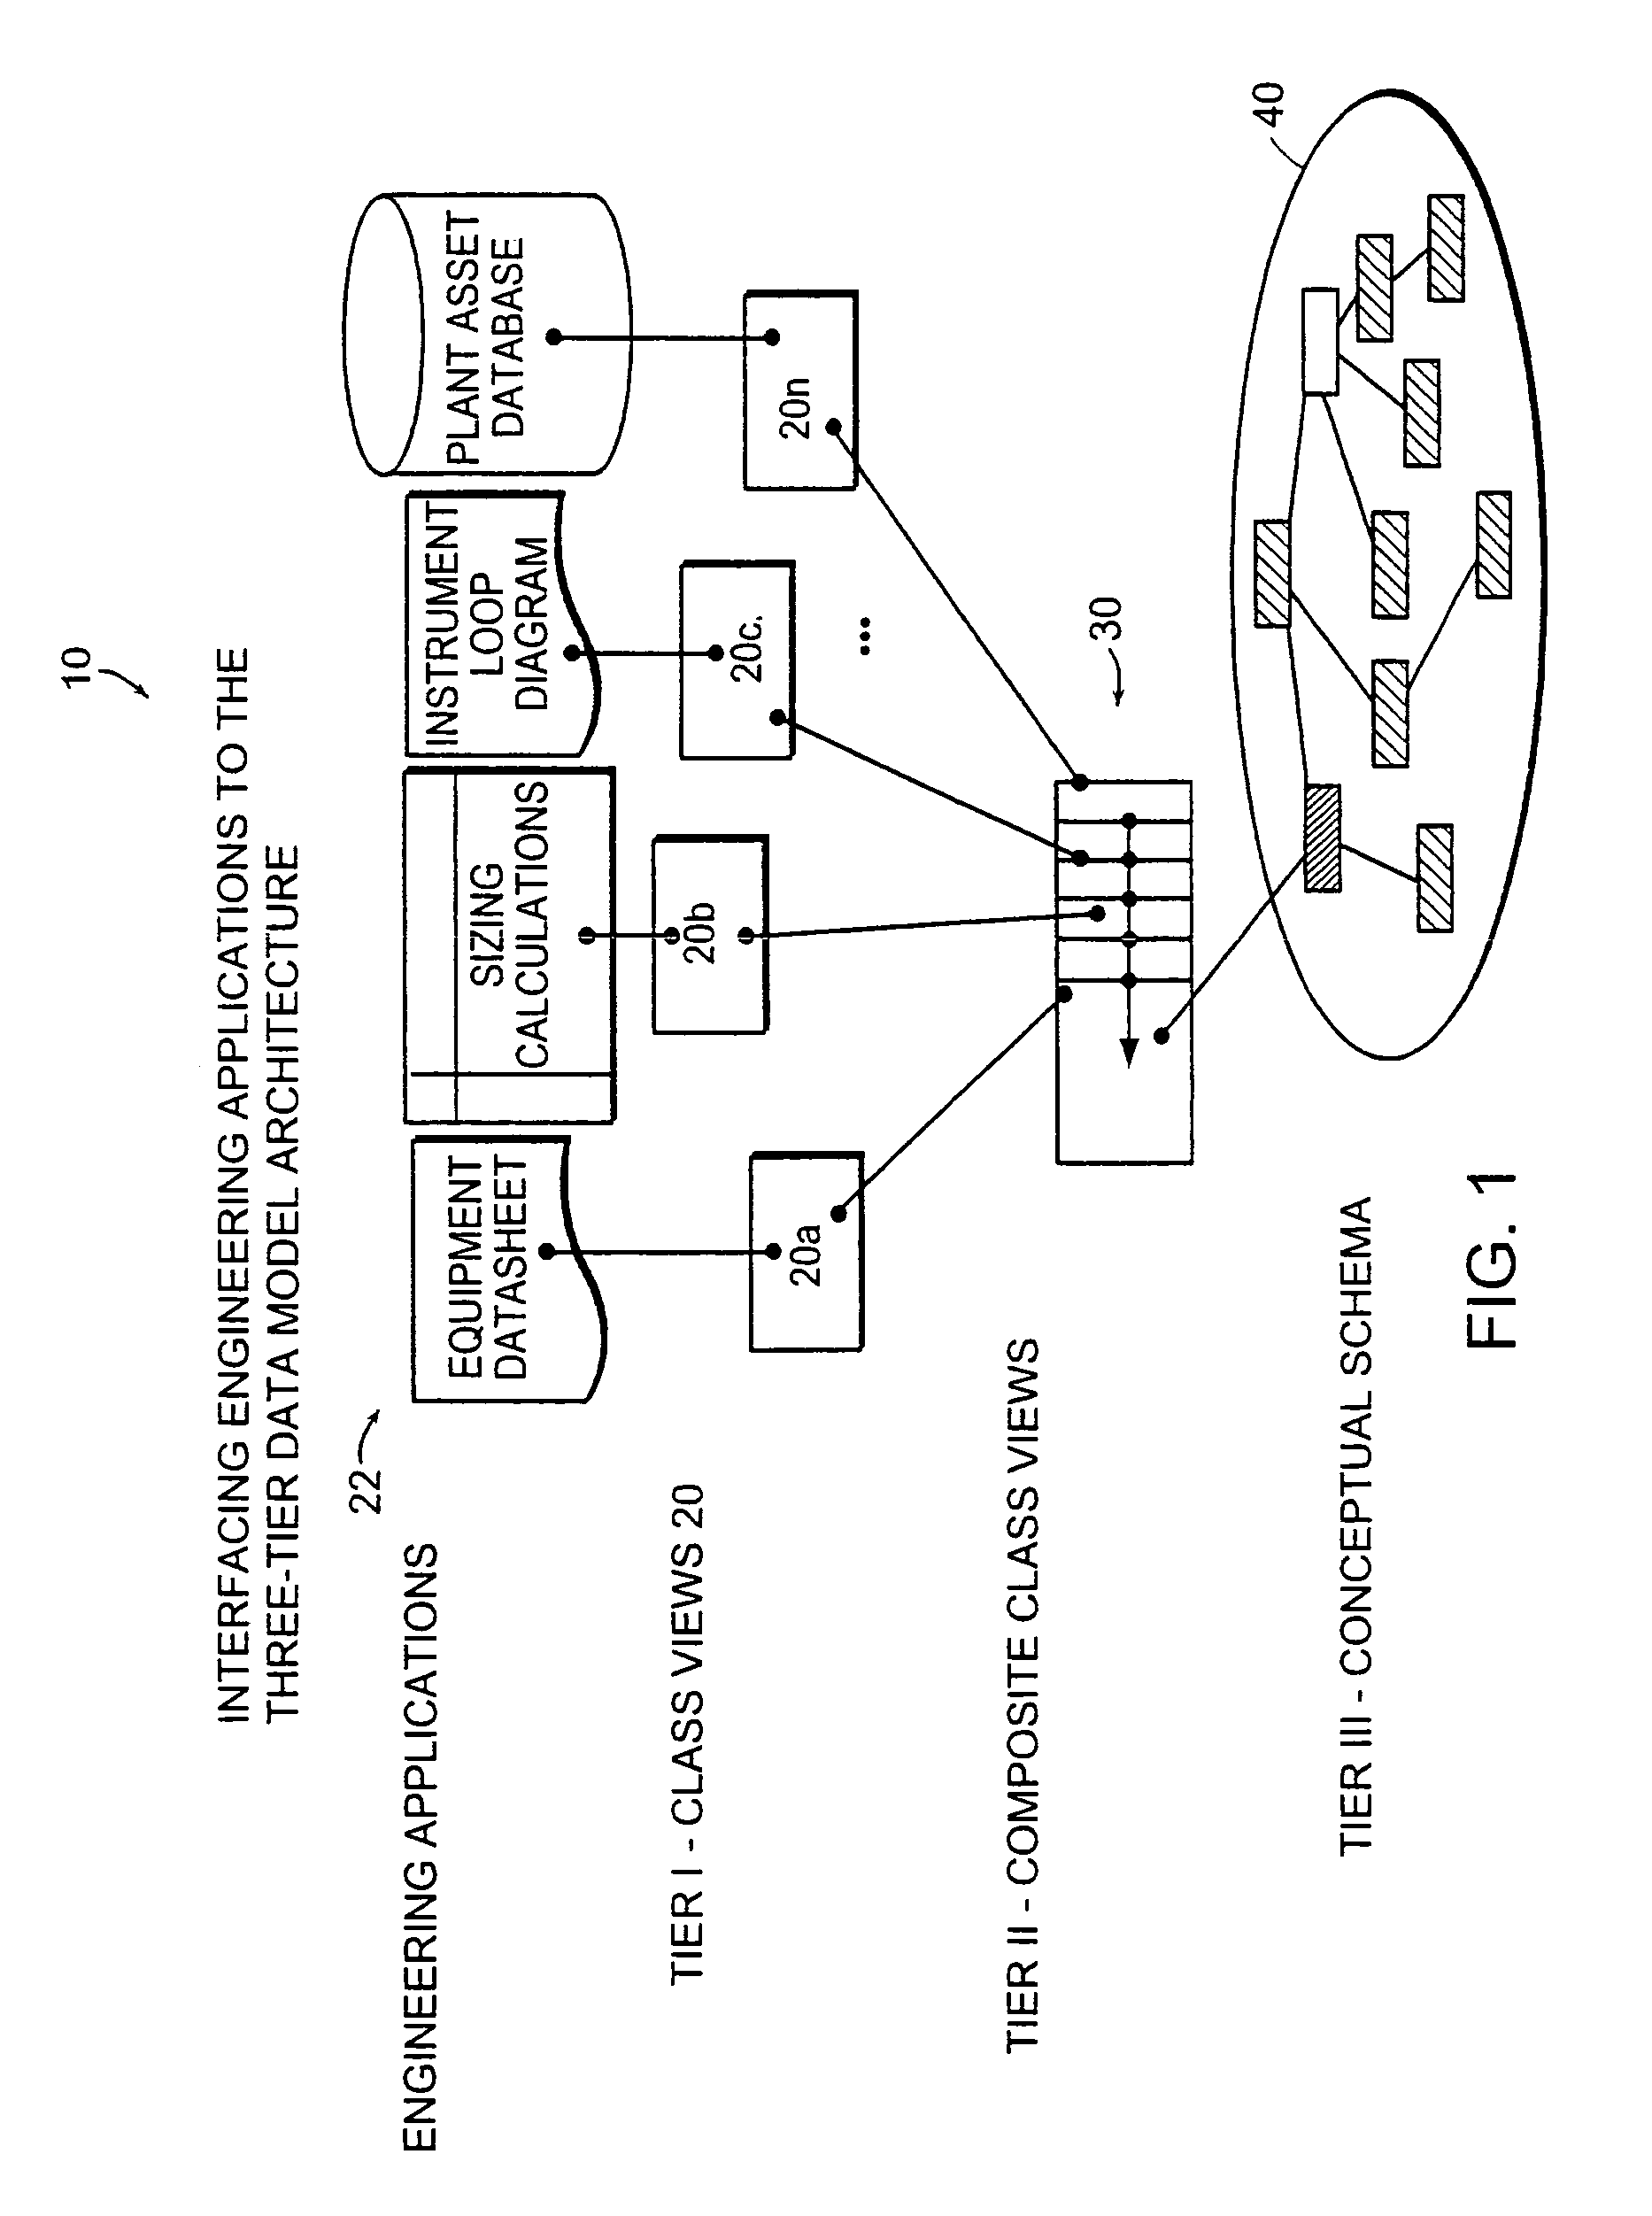 System and method for organizing and sharing of process plant design and operations data